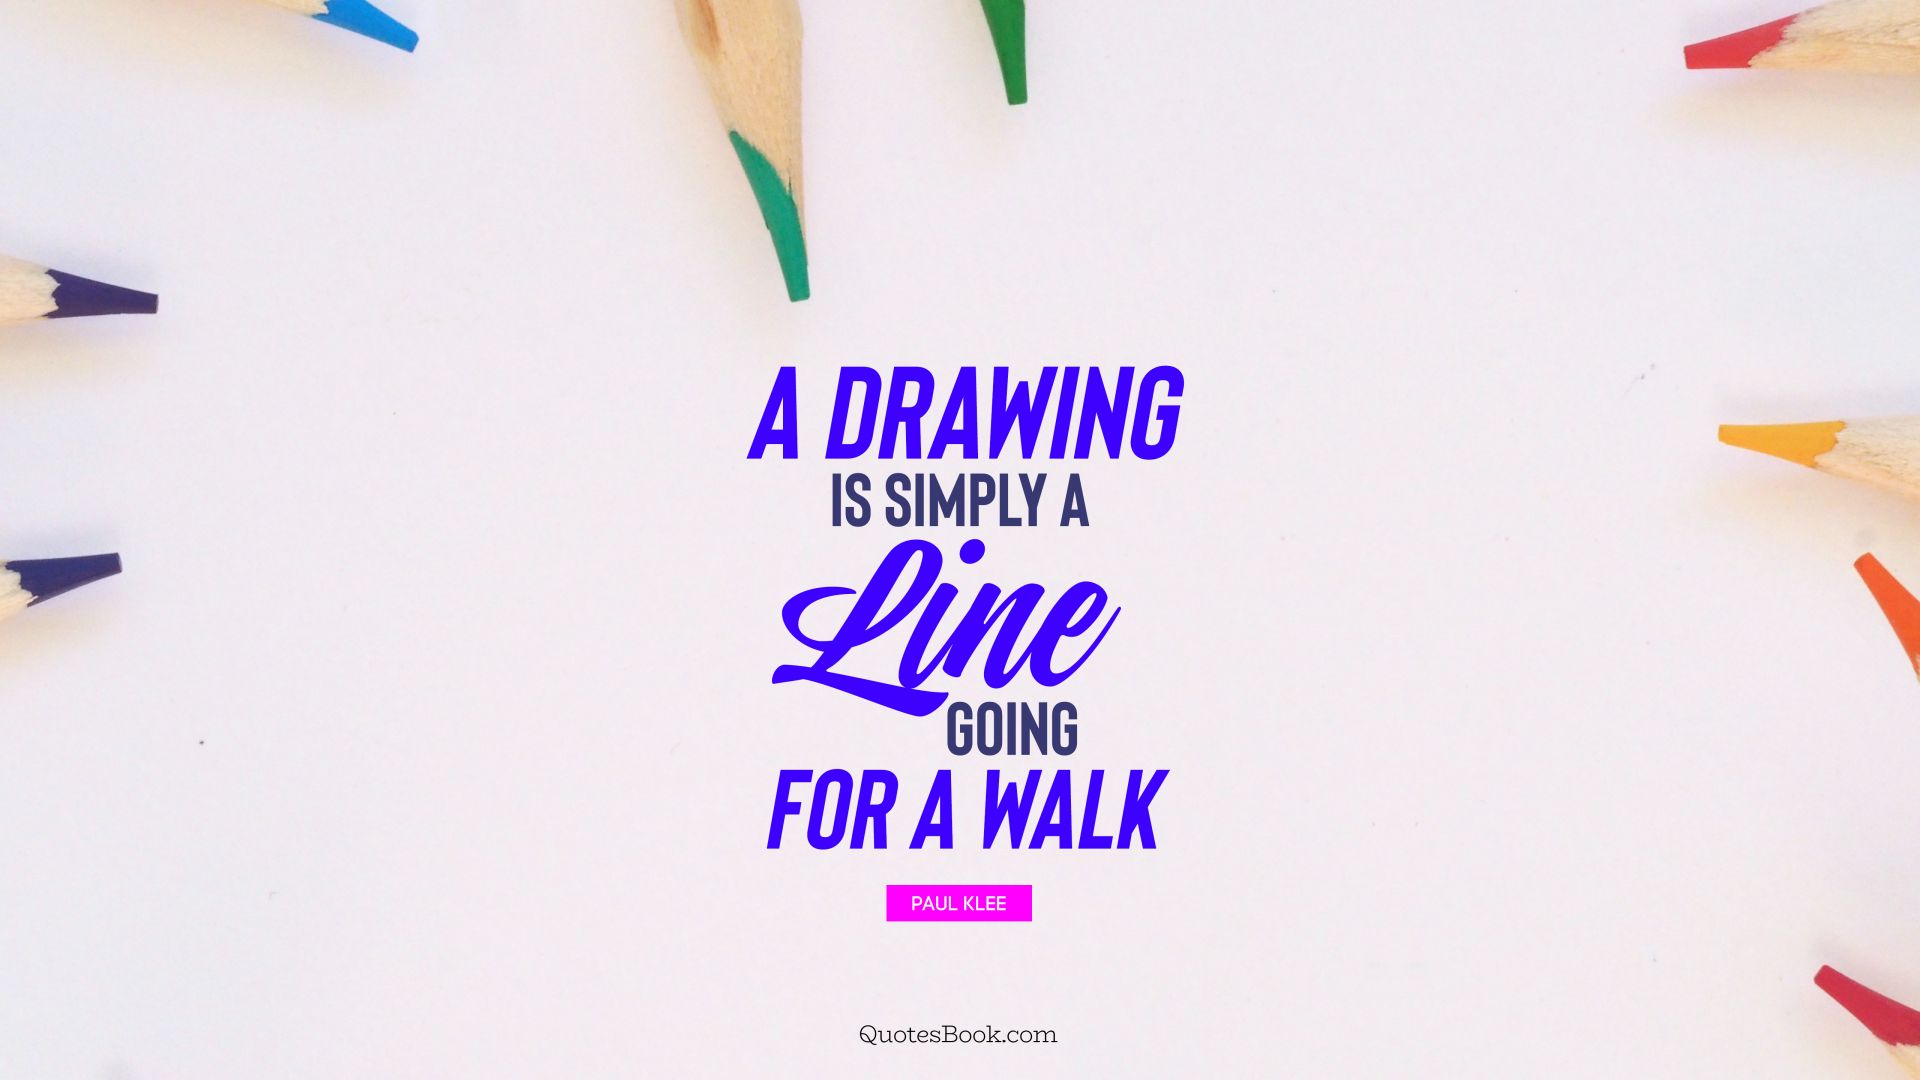 A drawing is simply a line going for a walk. - Quote by Paul Klee